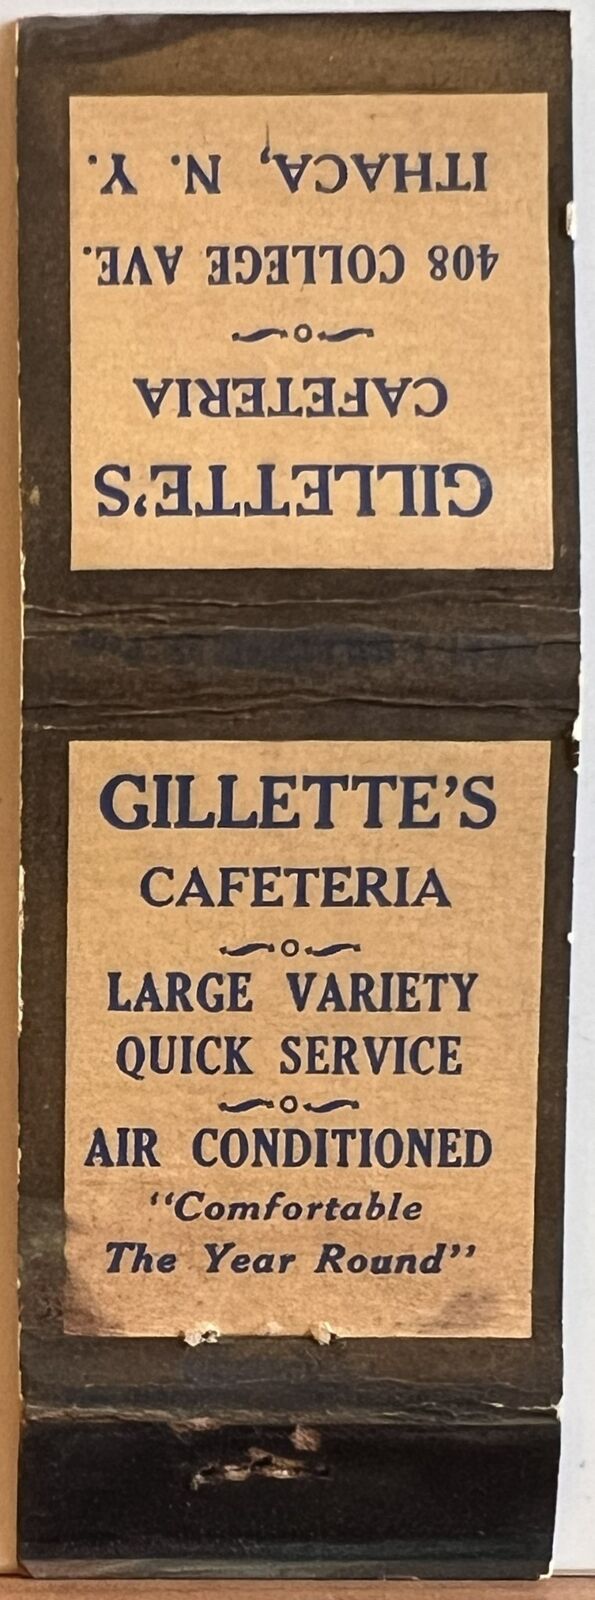 Gillette\'s Cafeteria Ithaca NY New York Vintage Matchbook Cover